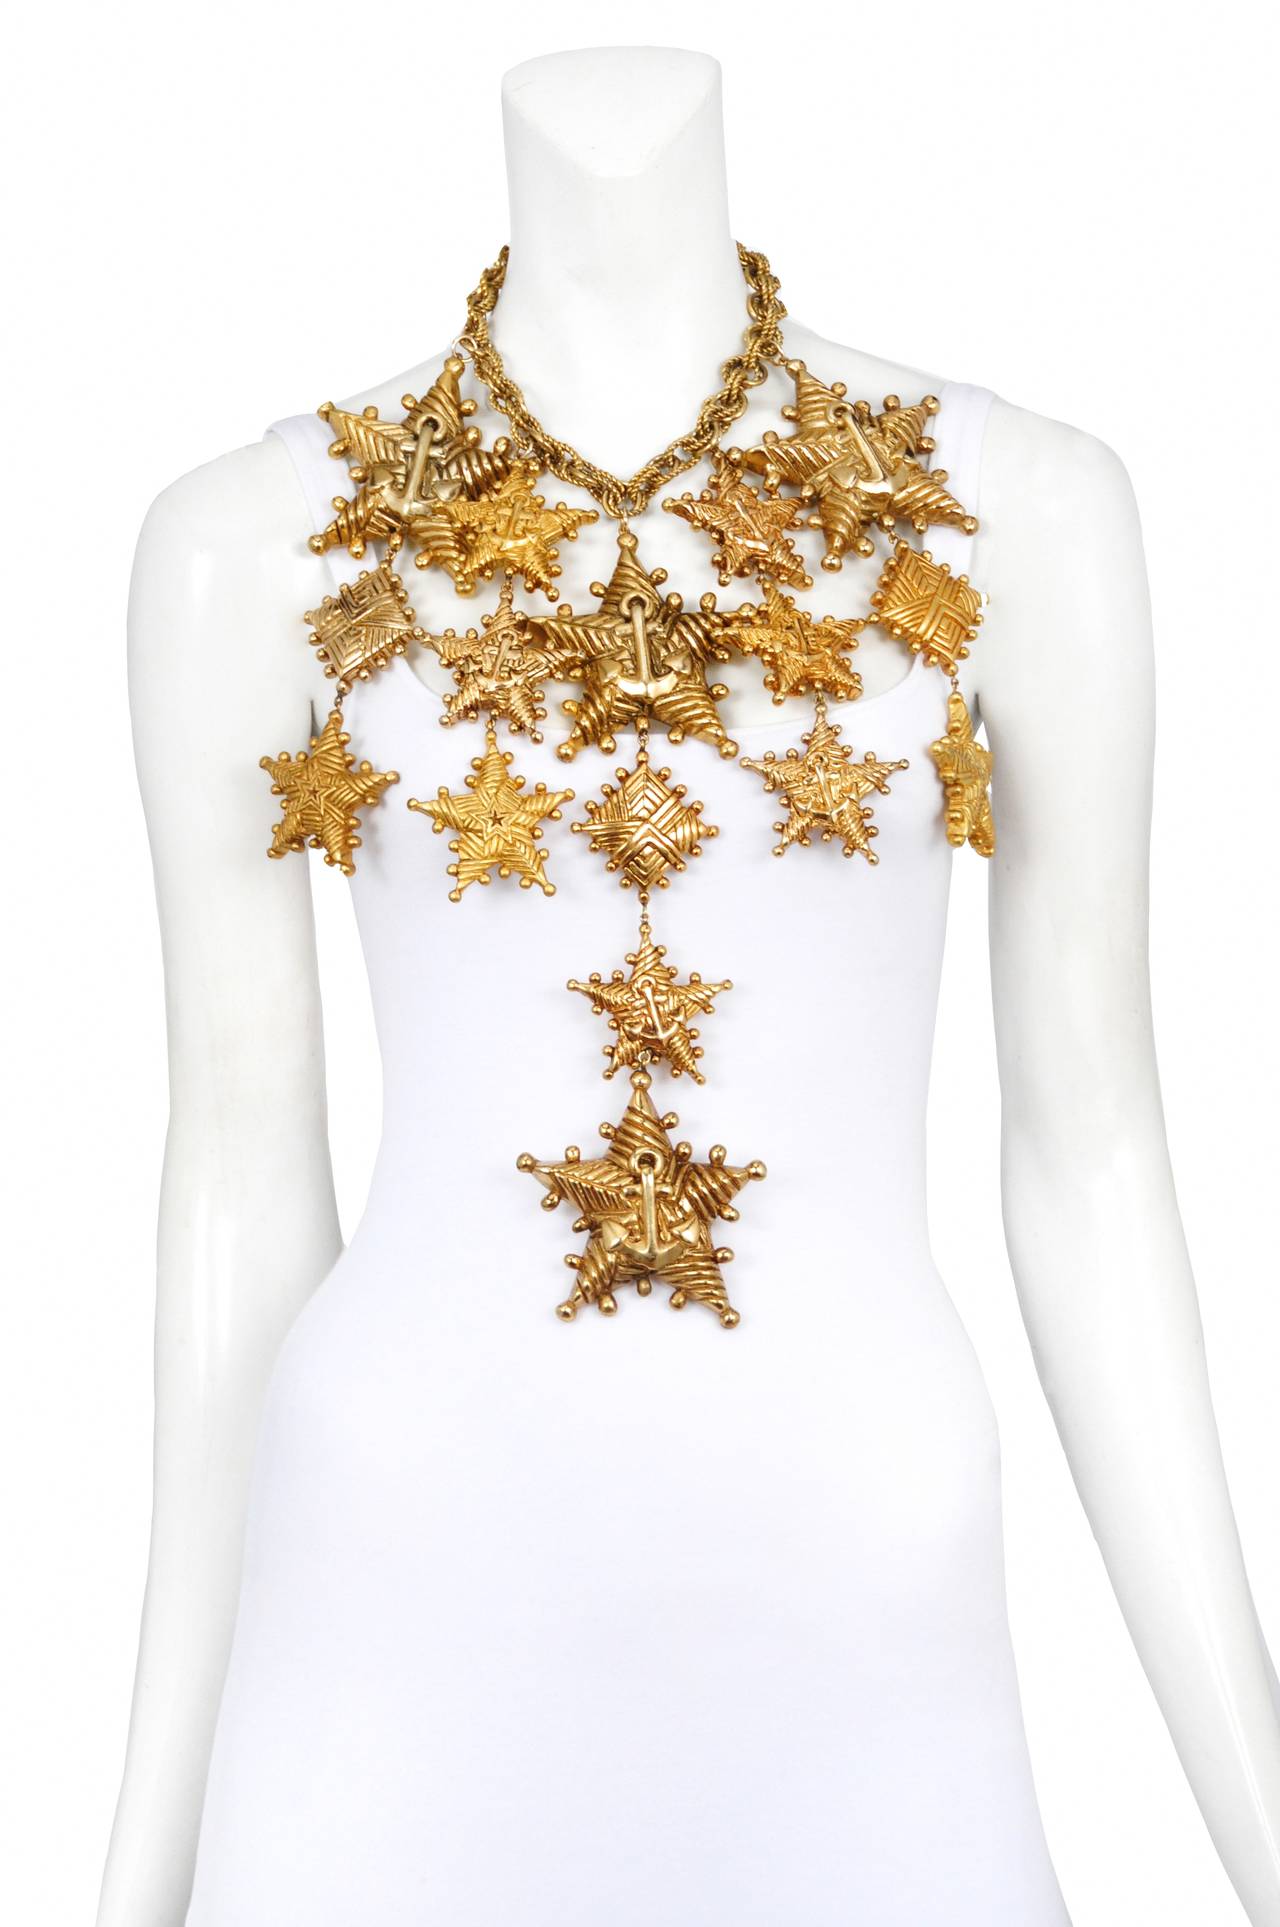 Vintage Escada nautical inspired necklace featuring a series of oversize gold tone nautical stars adorned with anchors and rope detailing that attach to a rope style gold tone chain